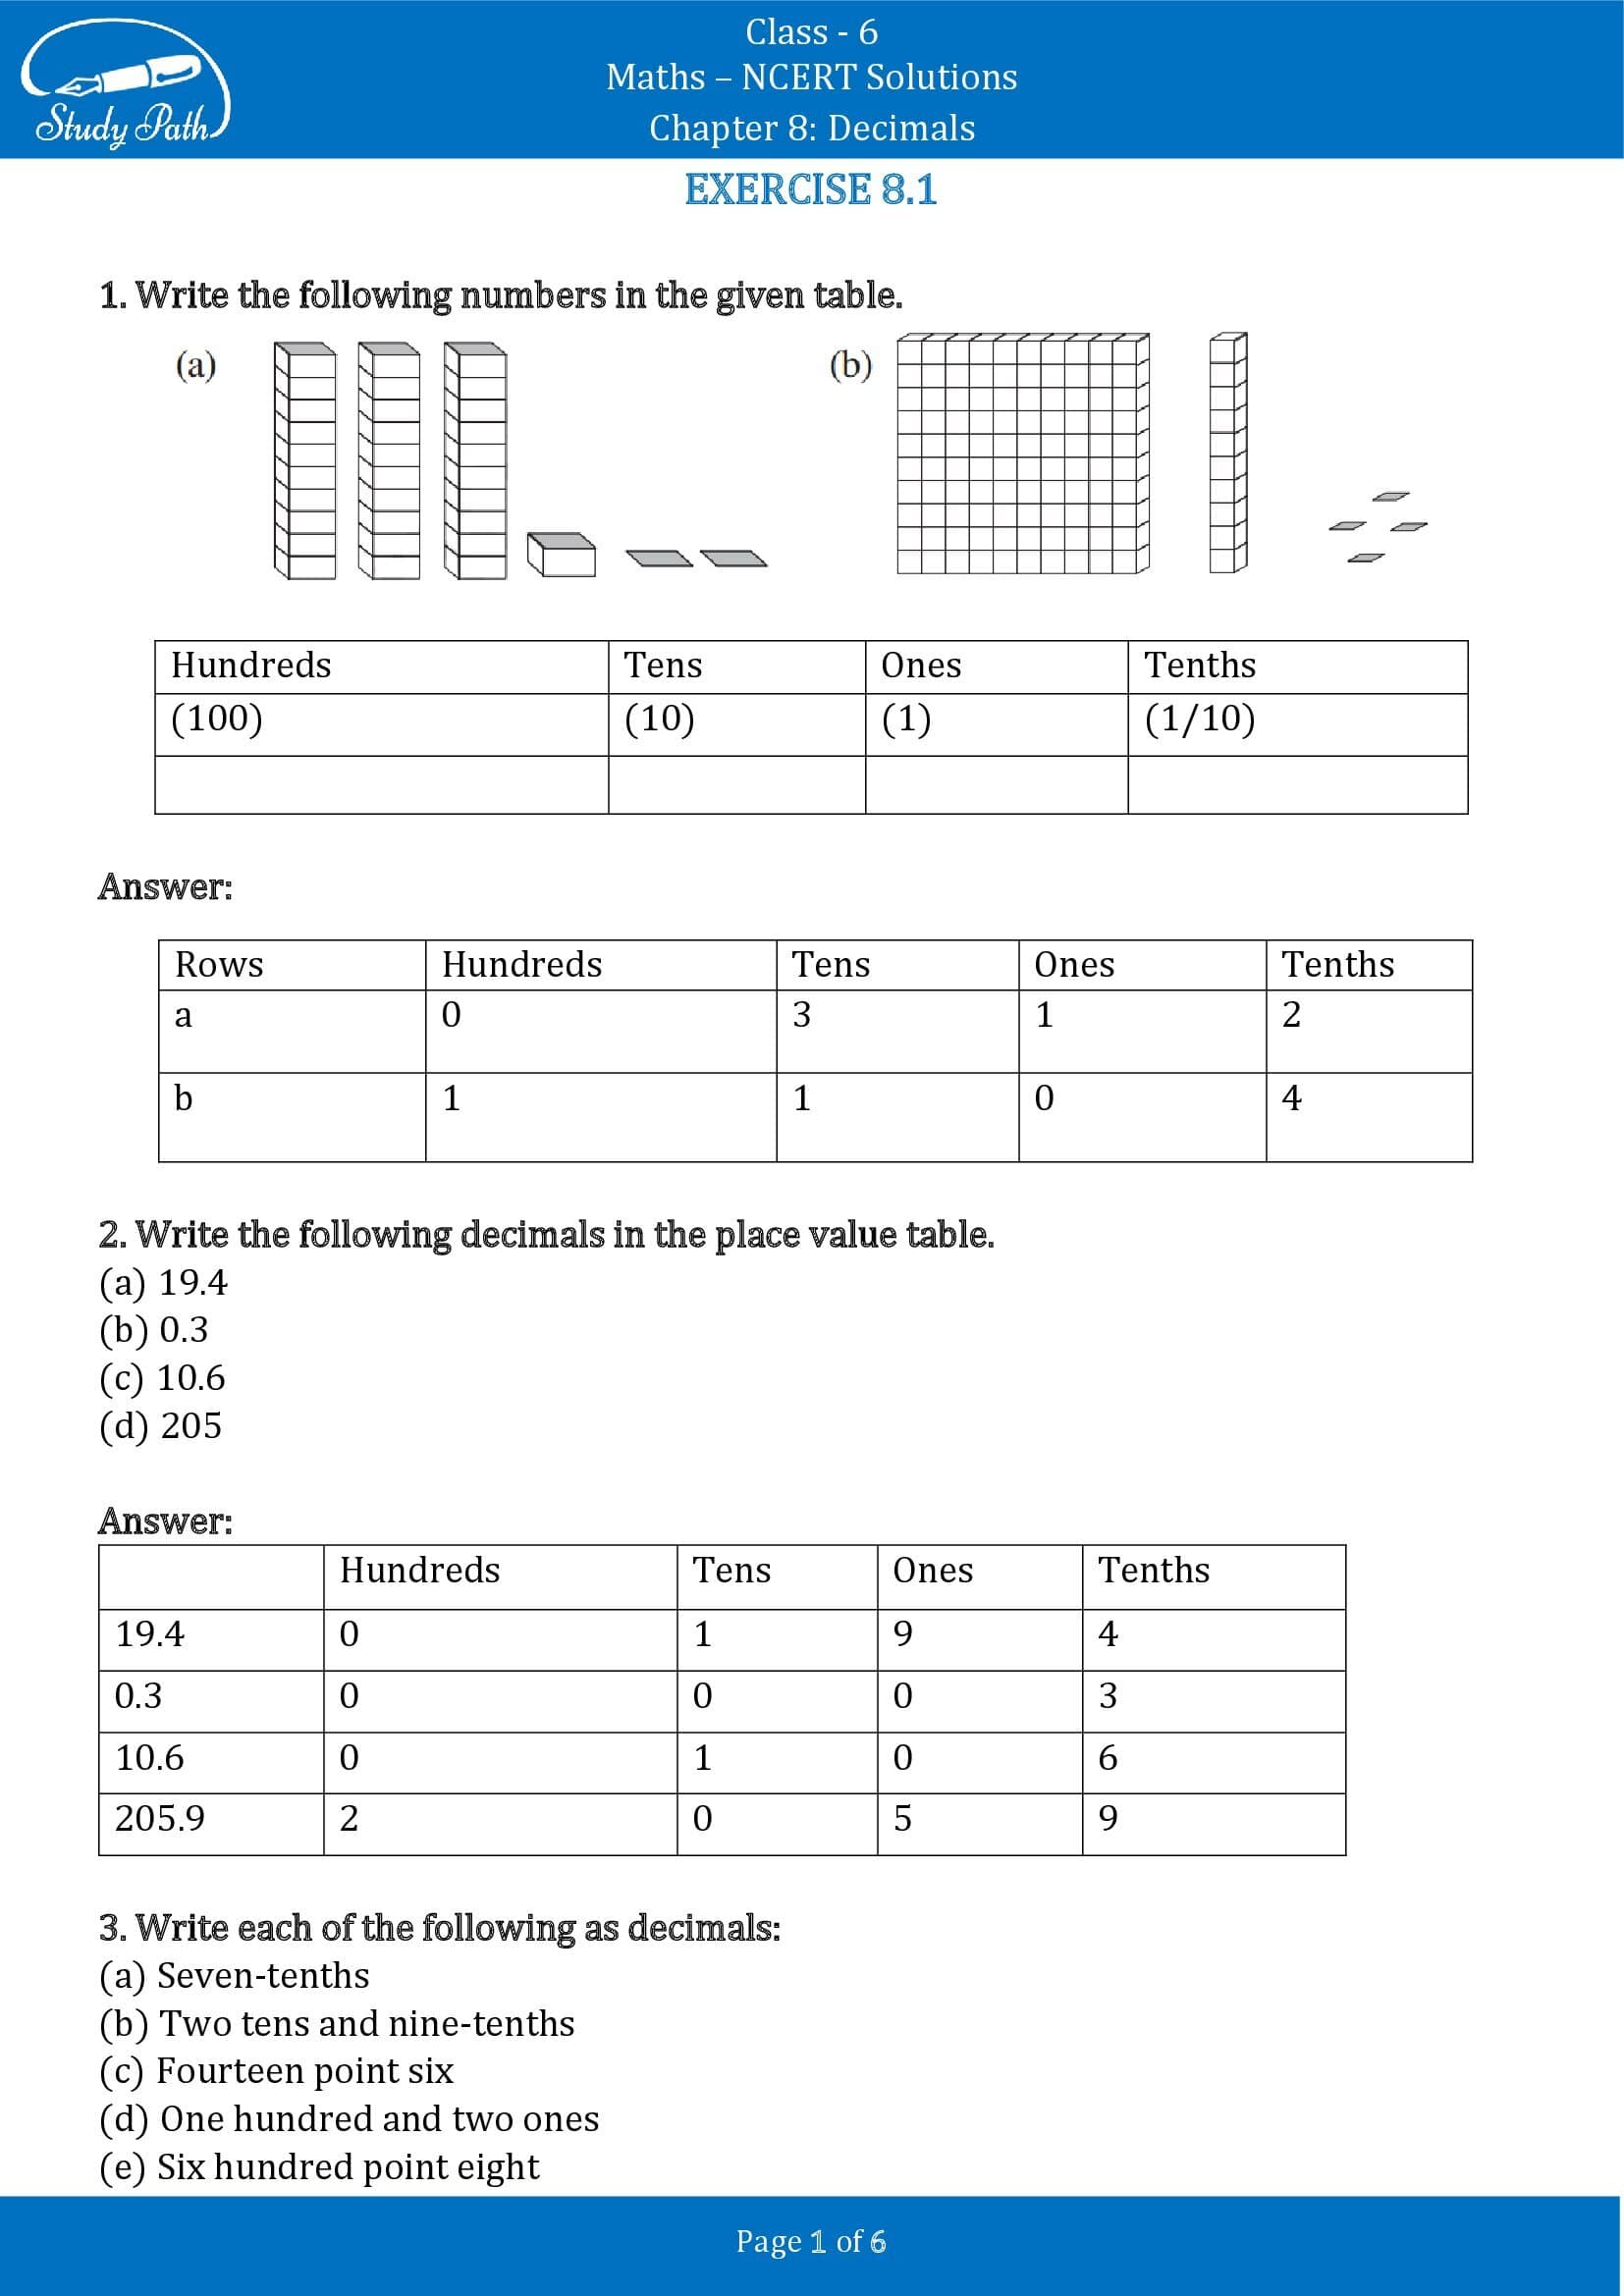 NCERT Solutions for Class 6 Maths Chapter 8 Decimals Exercise 8.1 00001